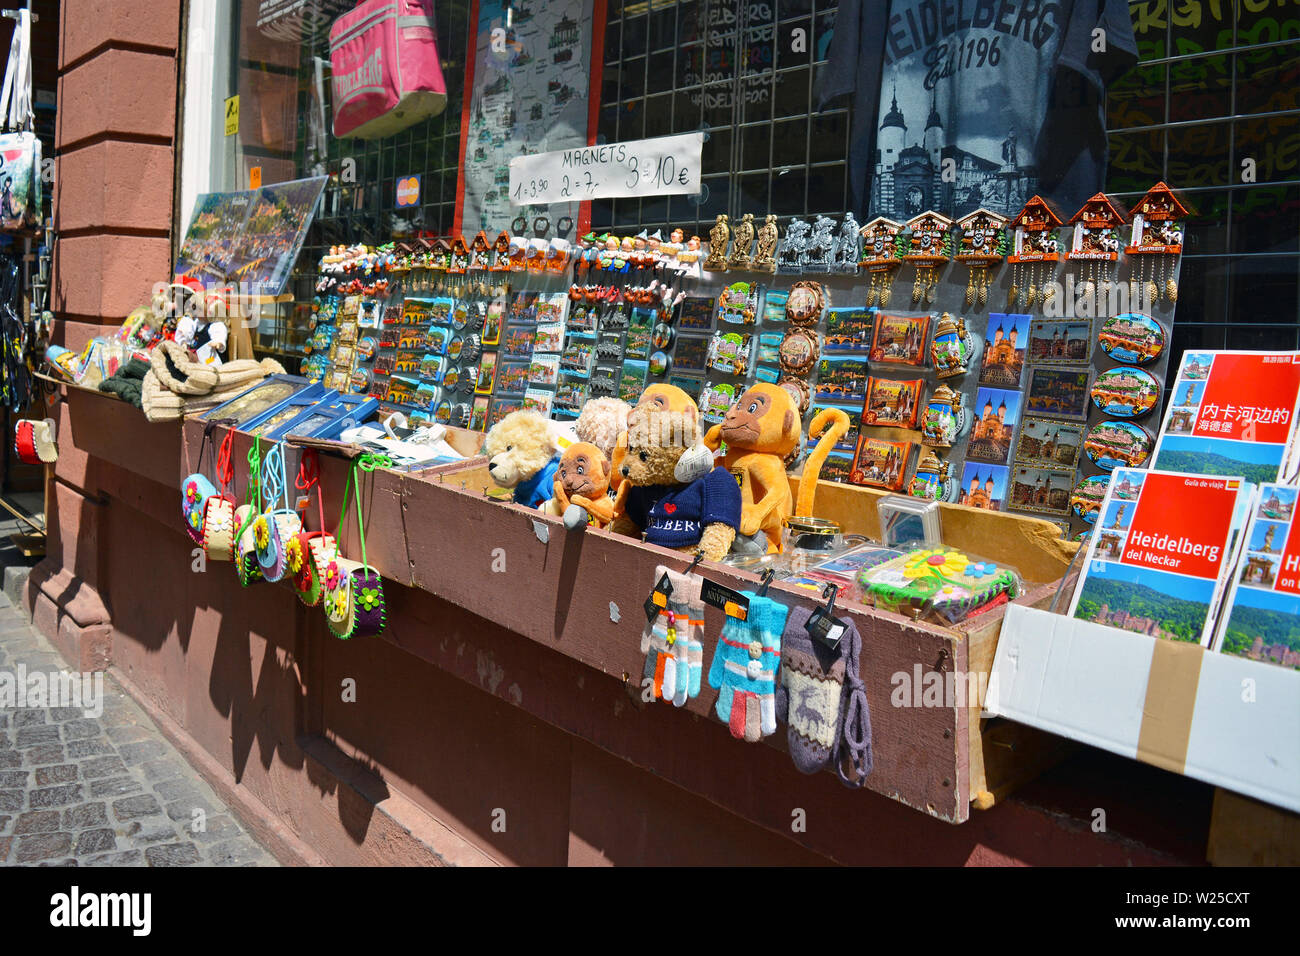 Souvenir shops offering various local trinkets like fridge magnets and plush toys in histrocail city center of Heidelberg, Germany Stock Photo